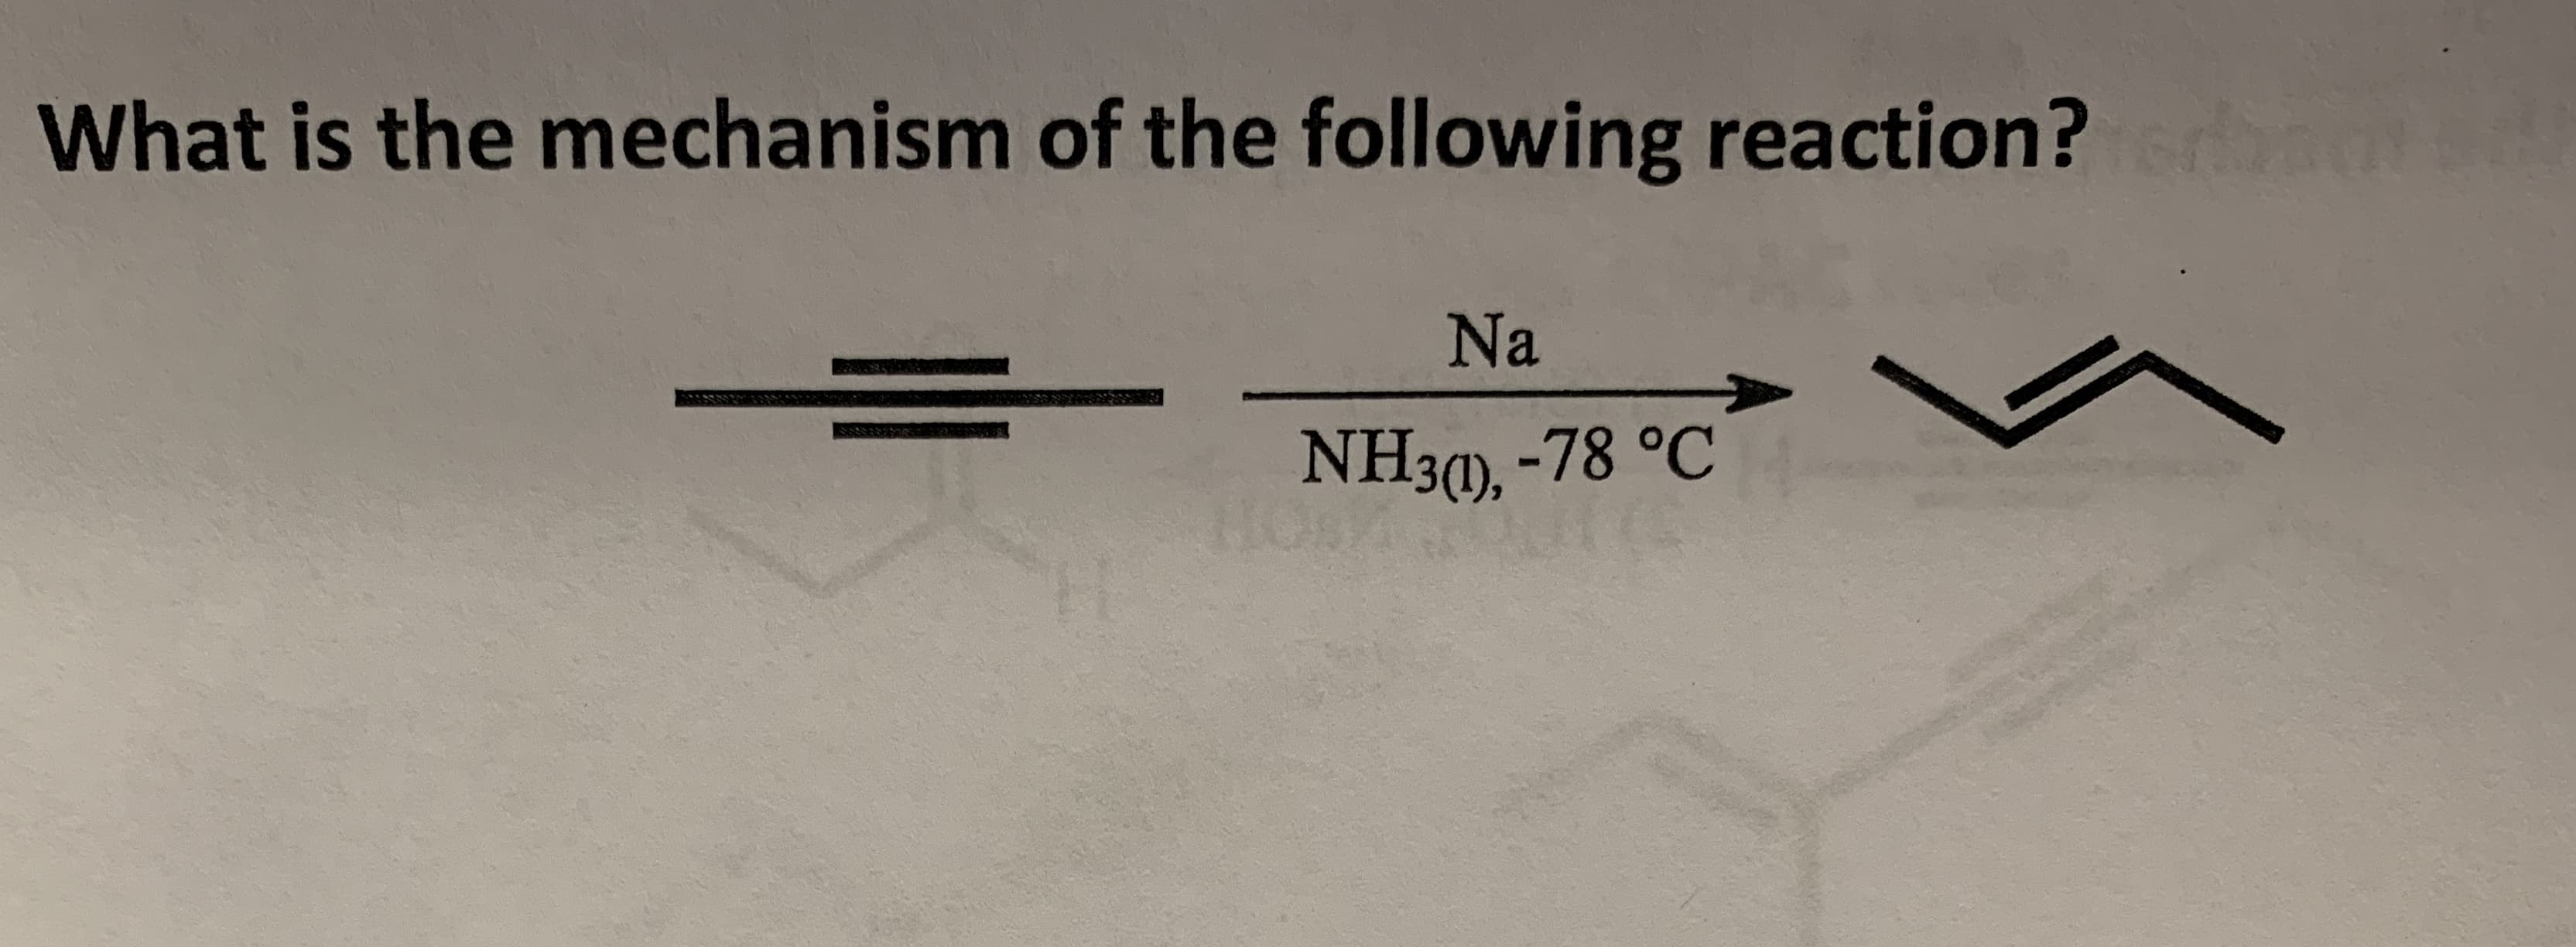 What is the mechanism of the following reaction?
Na
NH30), -78 °C
